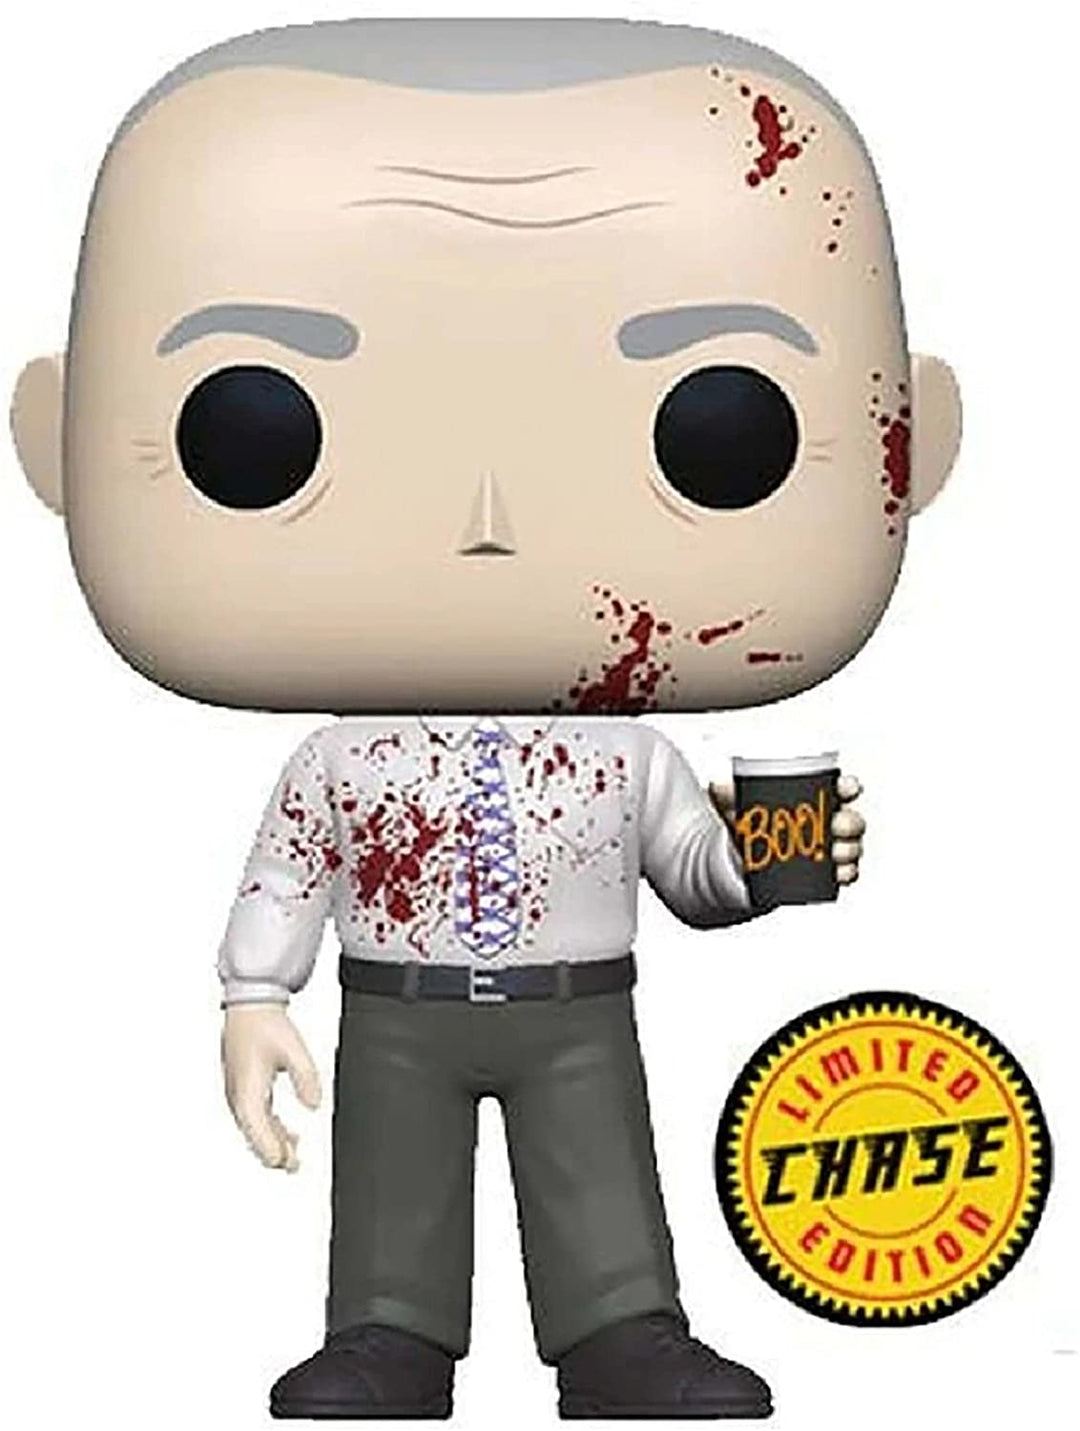 Funko Pop! TV: The Office - Creed Bloody Chase Specialty Series Vinyl Figure